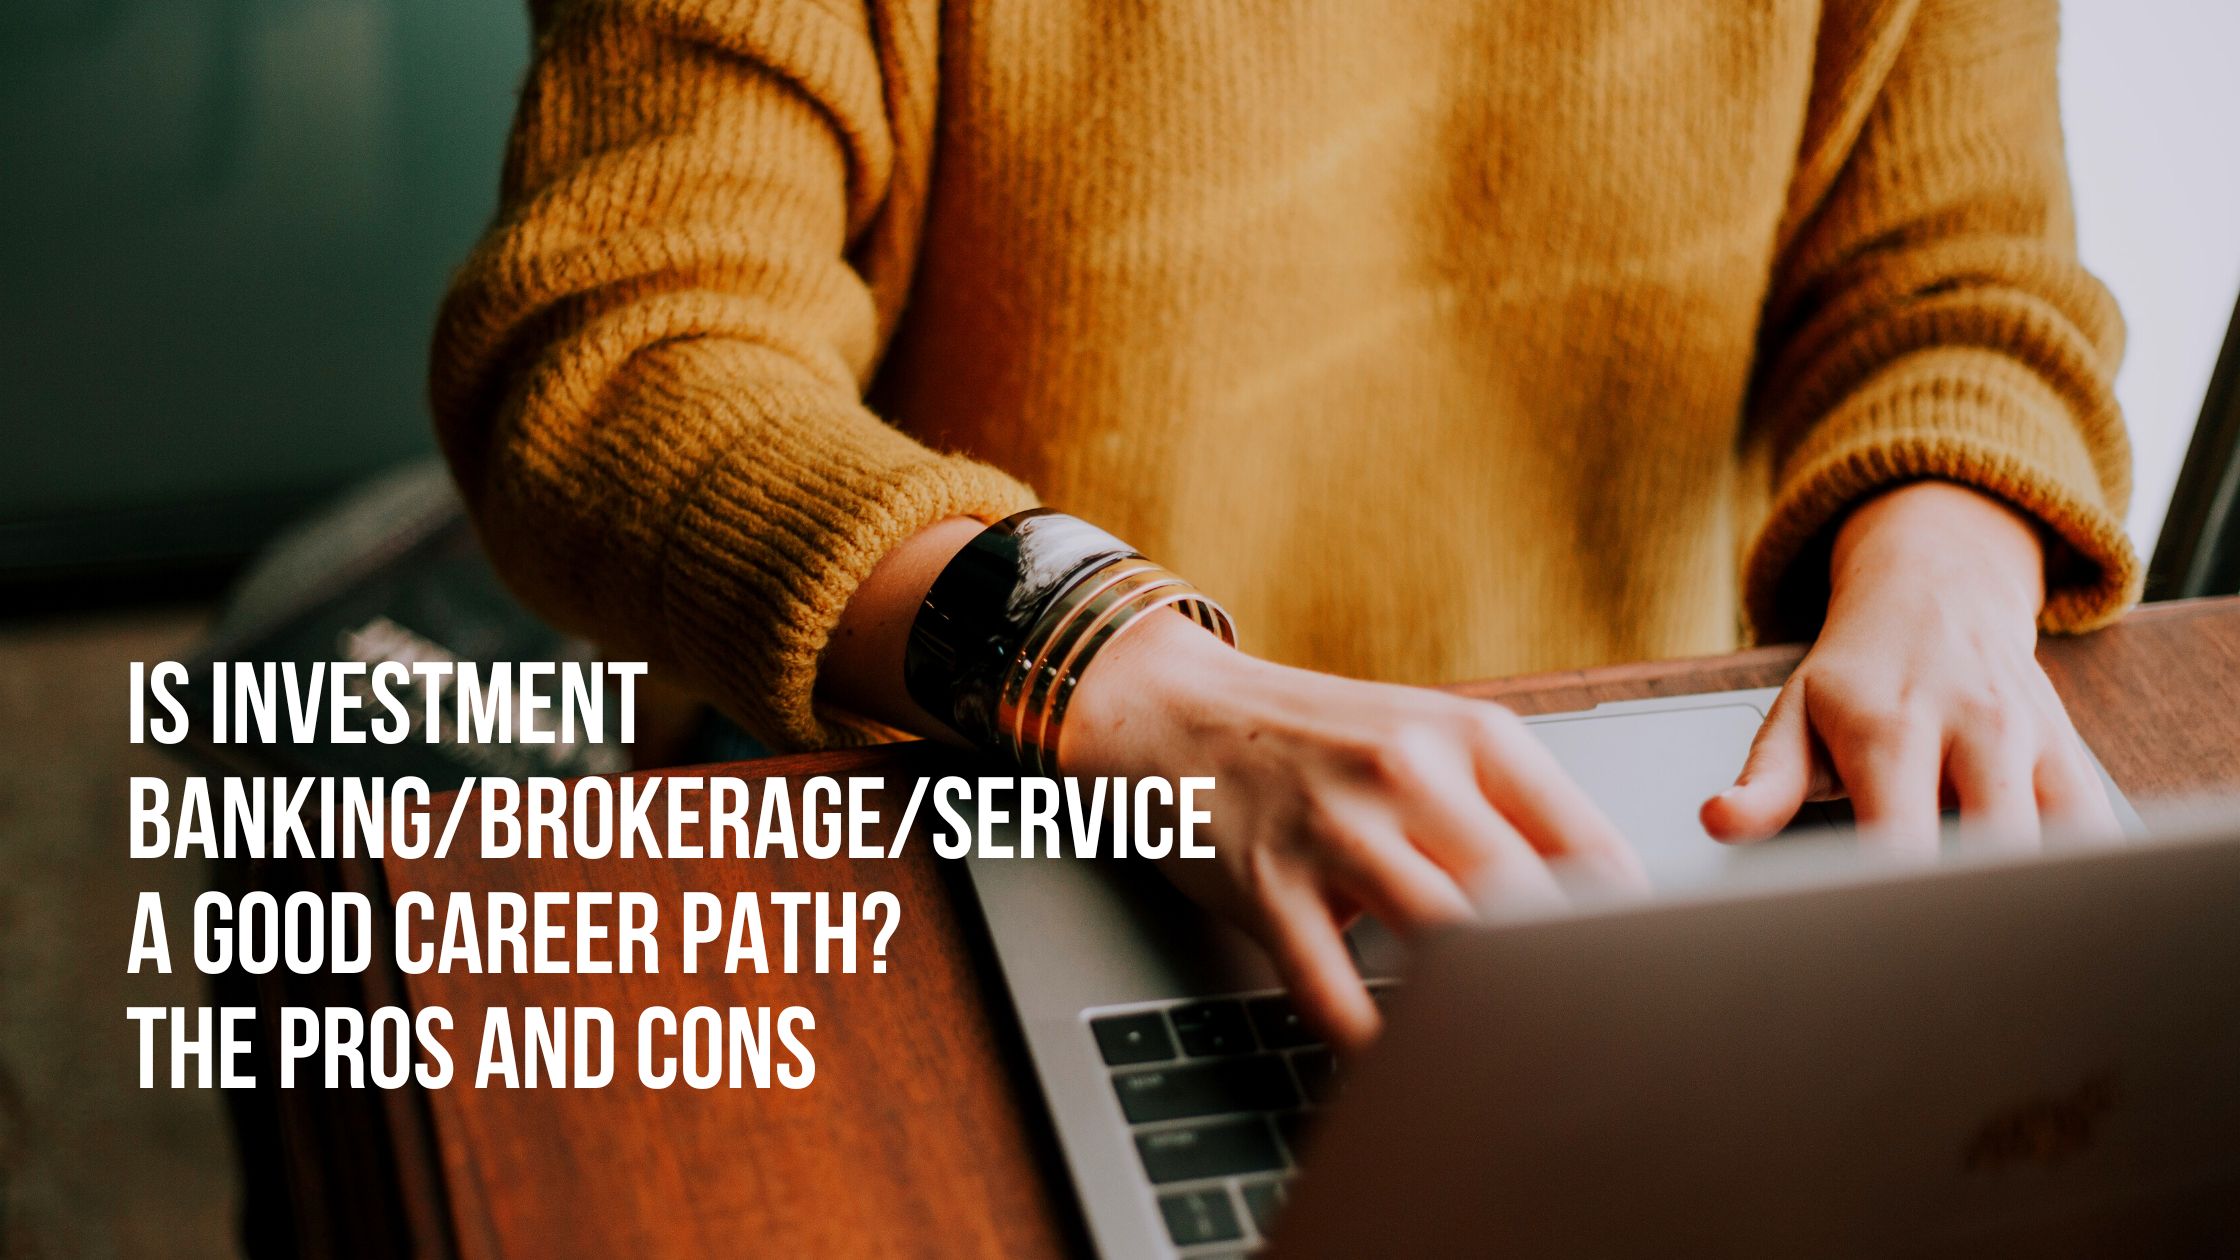 Is Investment Banking/Brokerage/Service a Good Career Path? The Pros and Cons